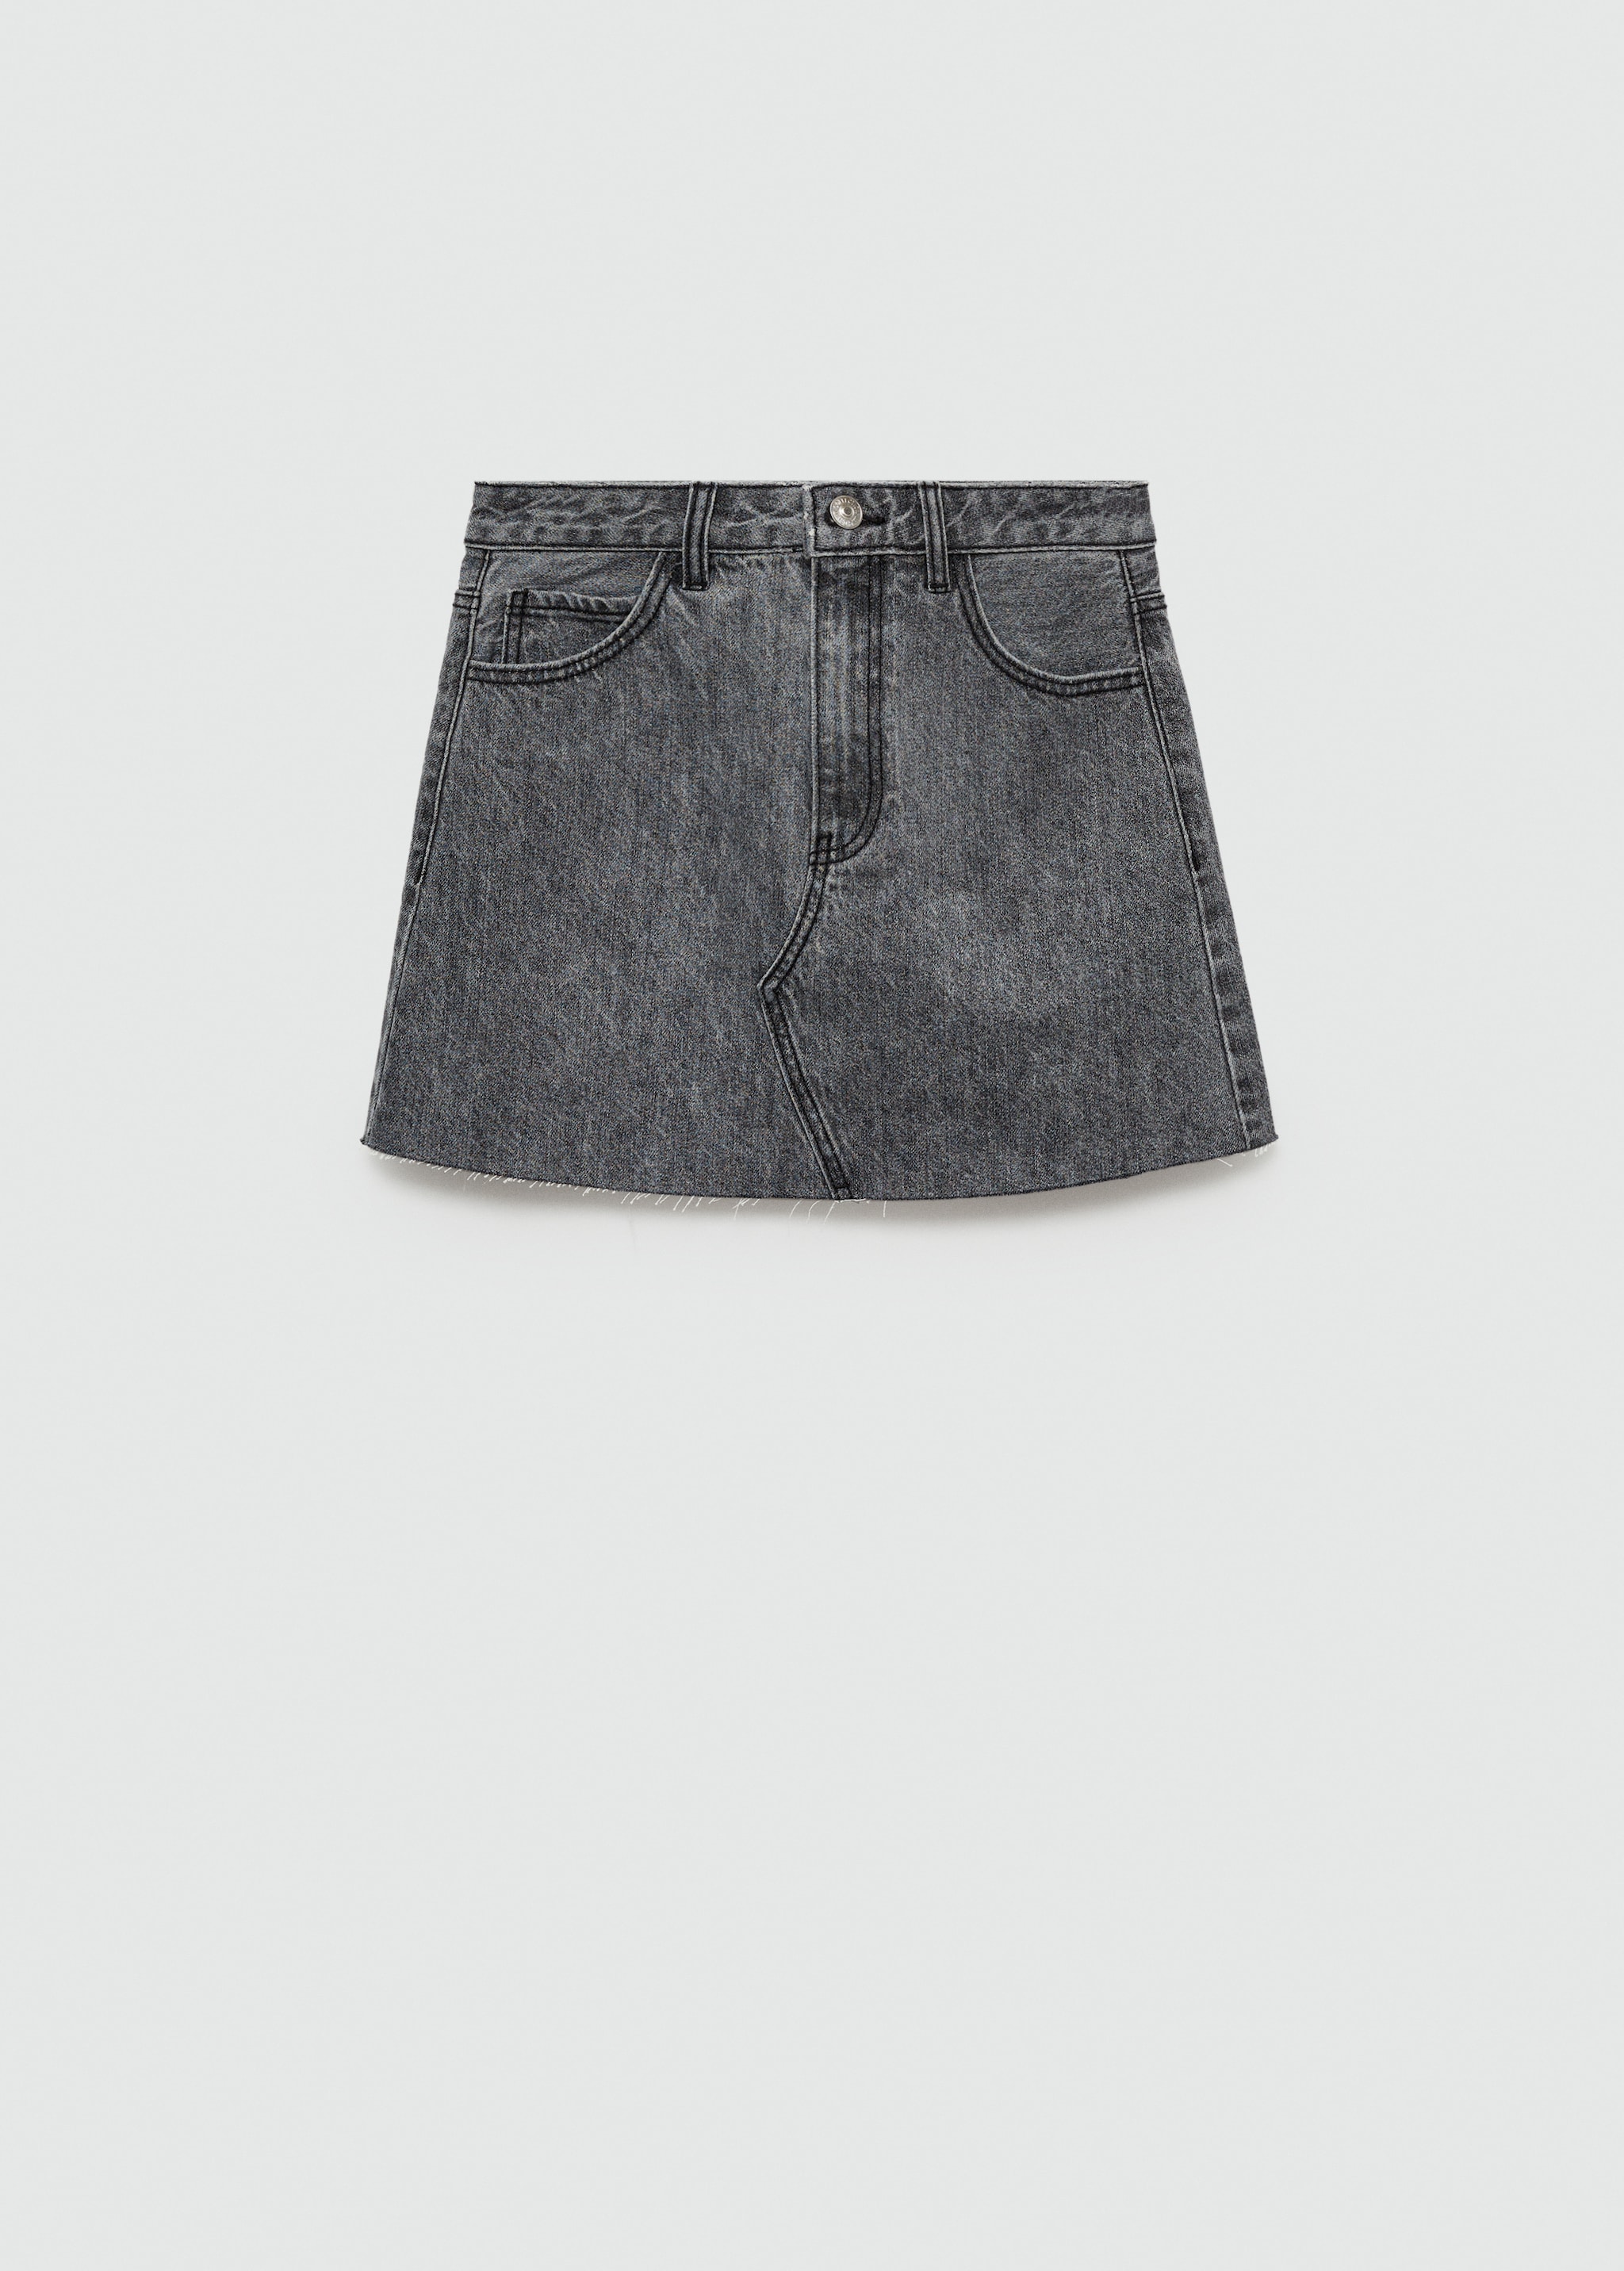 Denim mini-skirt - Article without model